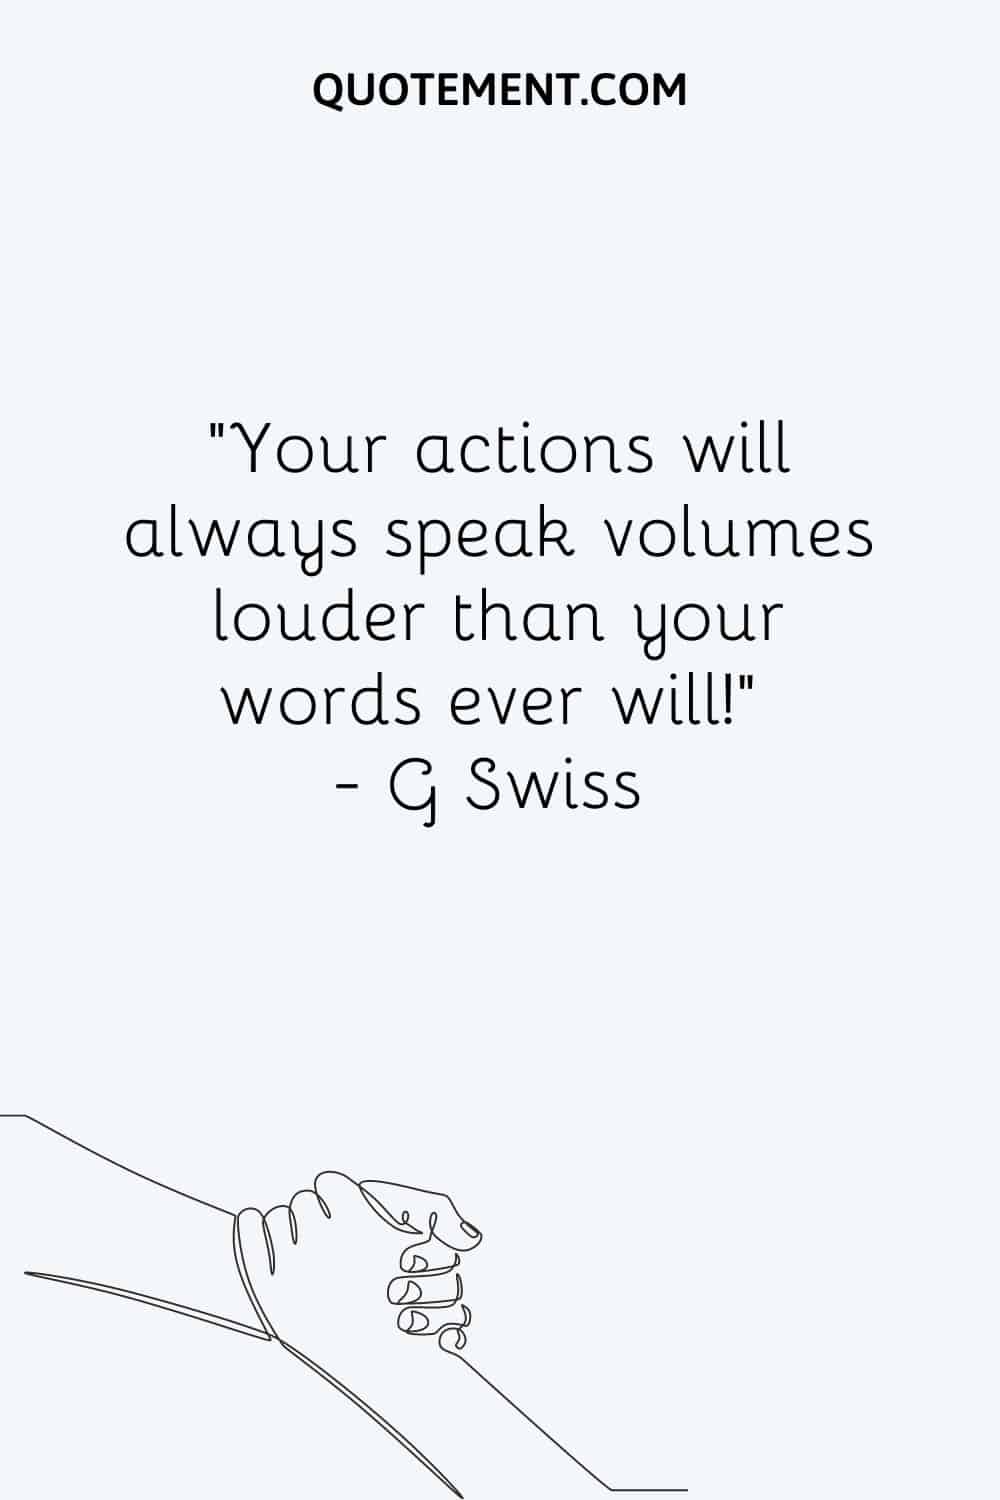 Your actions will always speak volumes louder than your words ever will